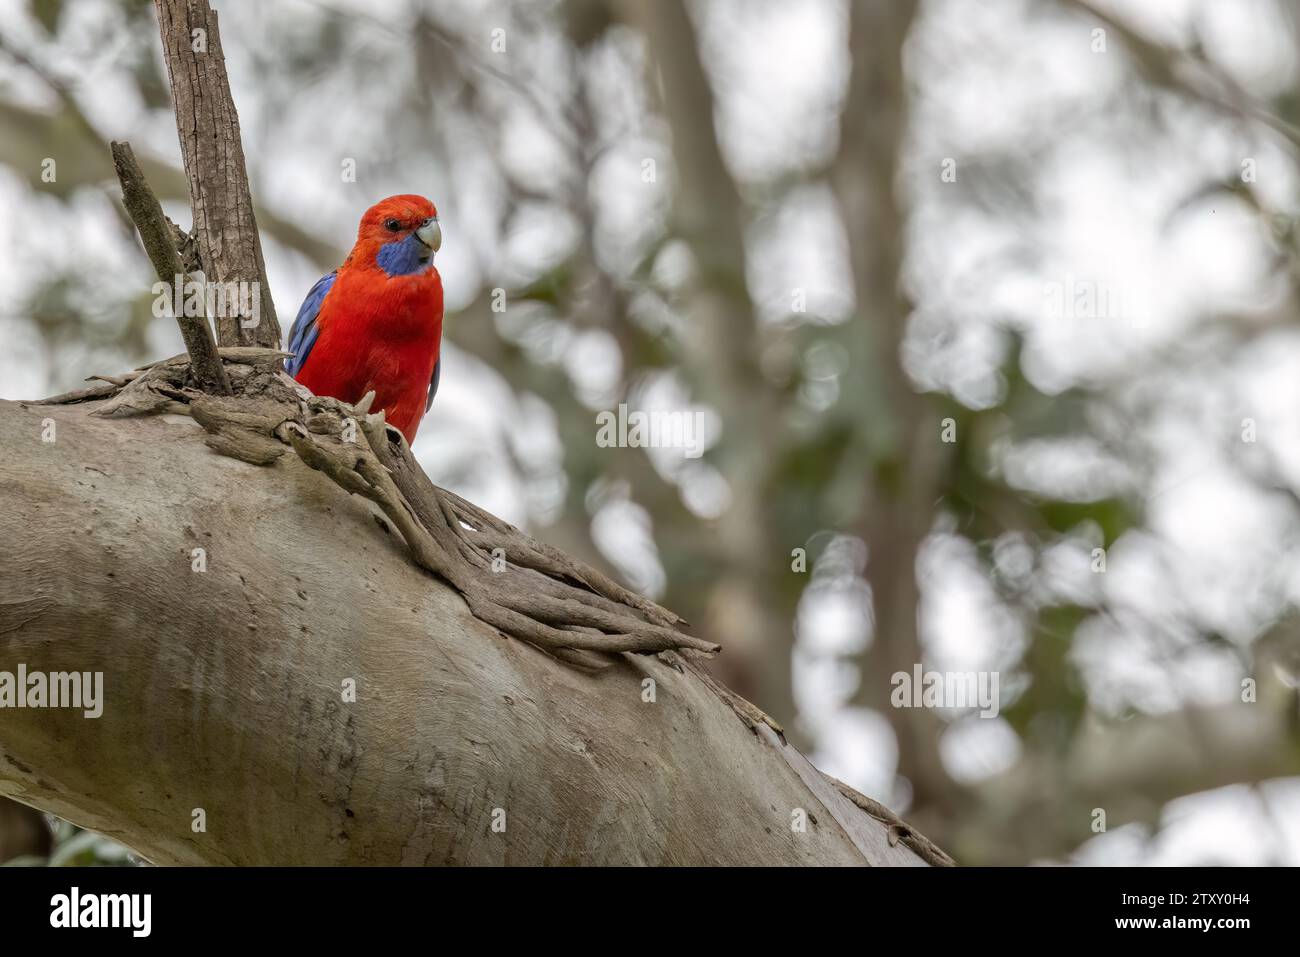 Crimson Rosella (Platycercus elegans) looking at camera, while perched on a tree branch. Blurry background providing copy space. Stock Photo